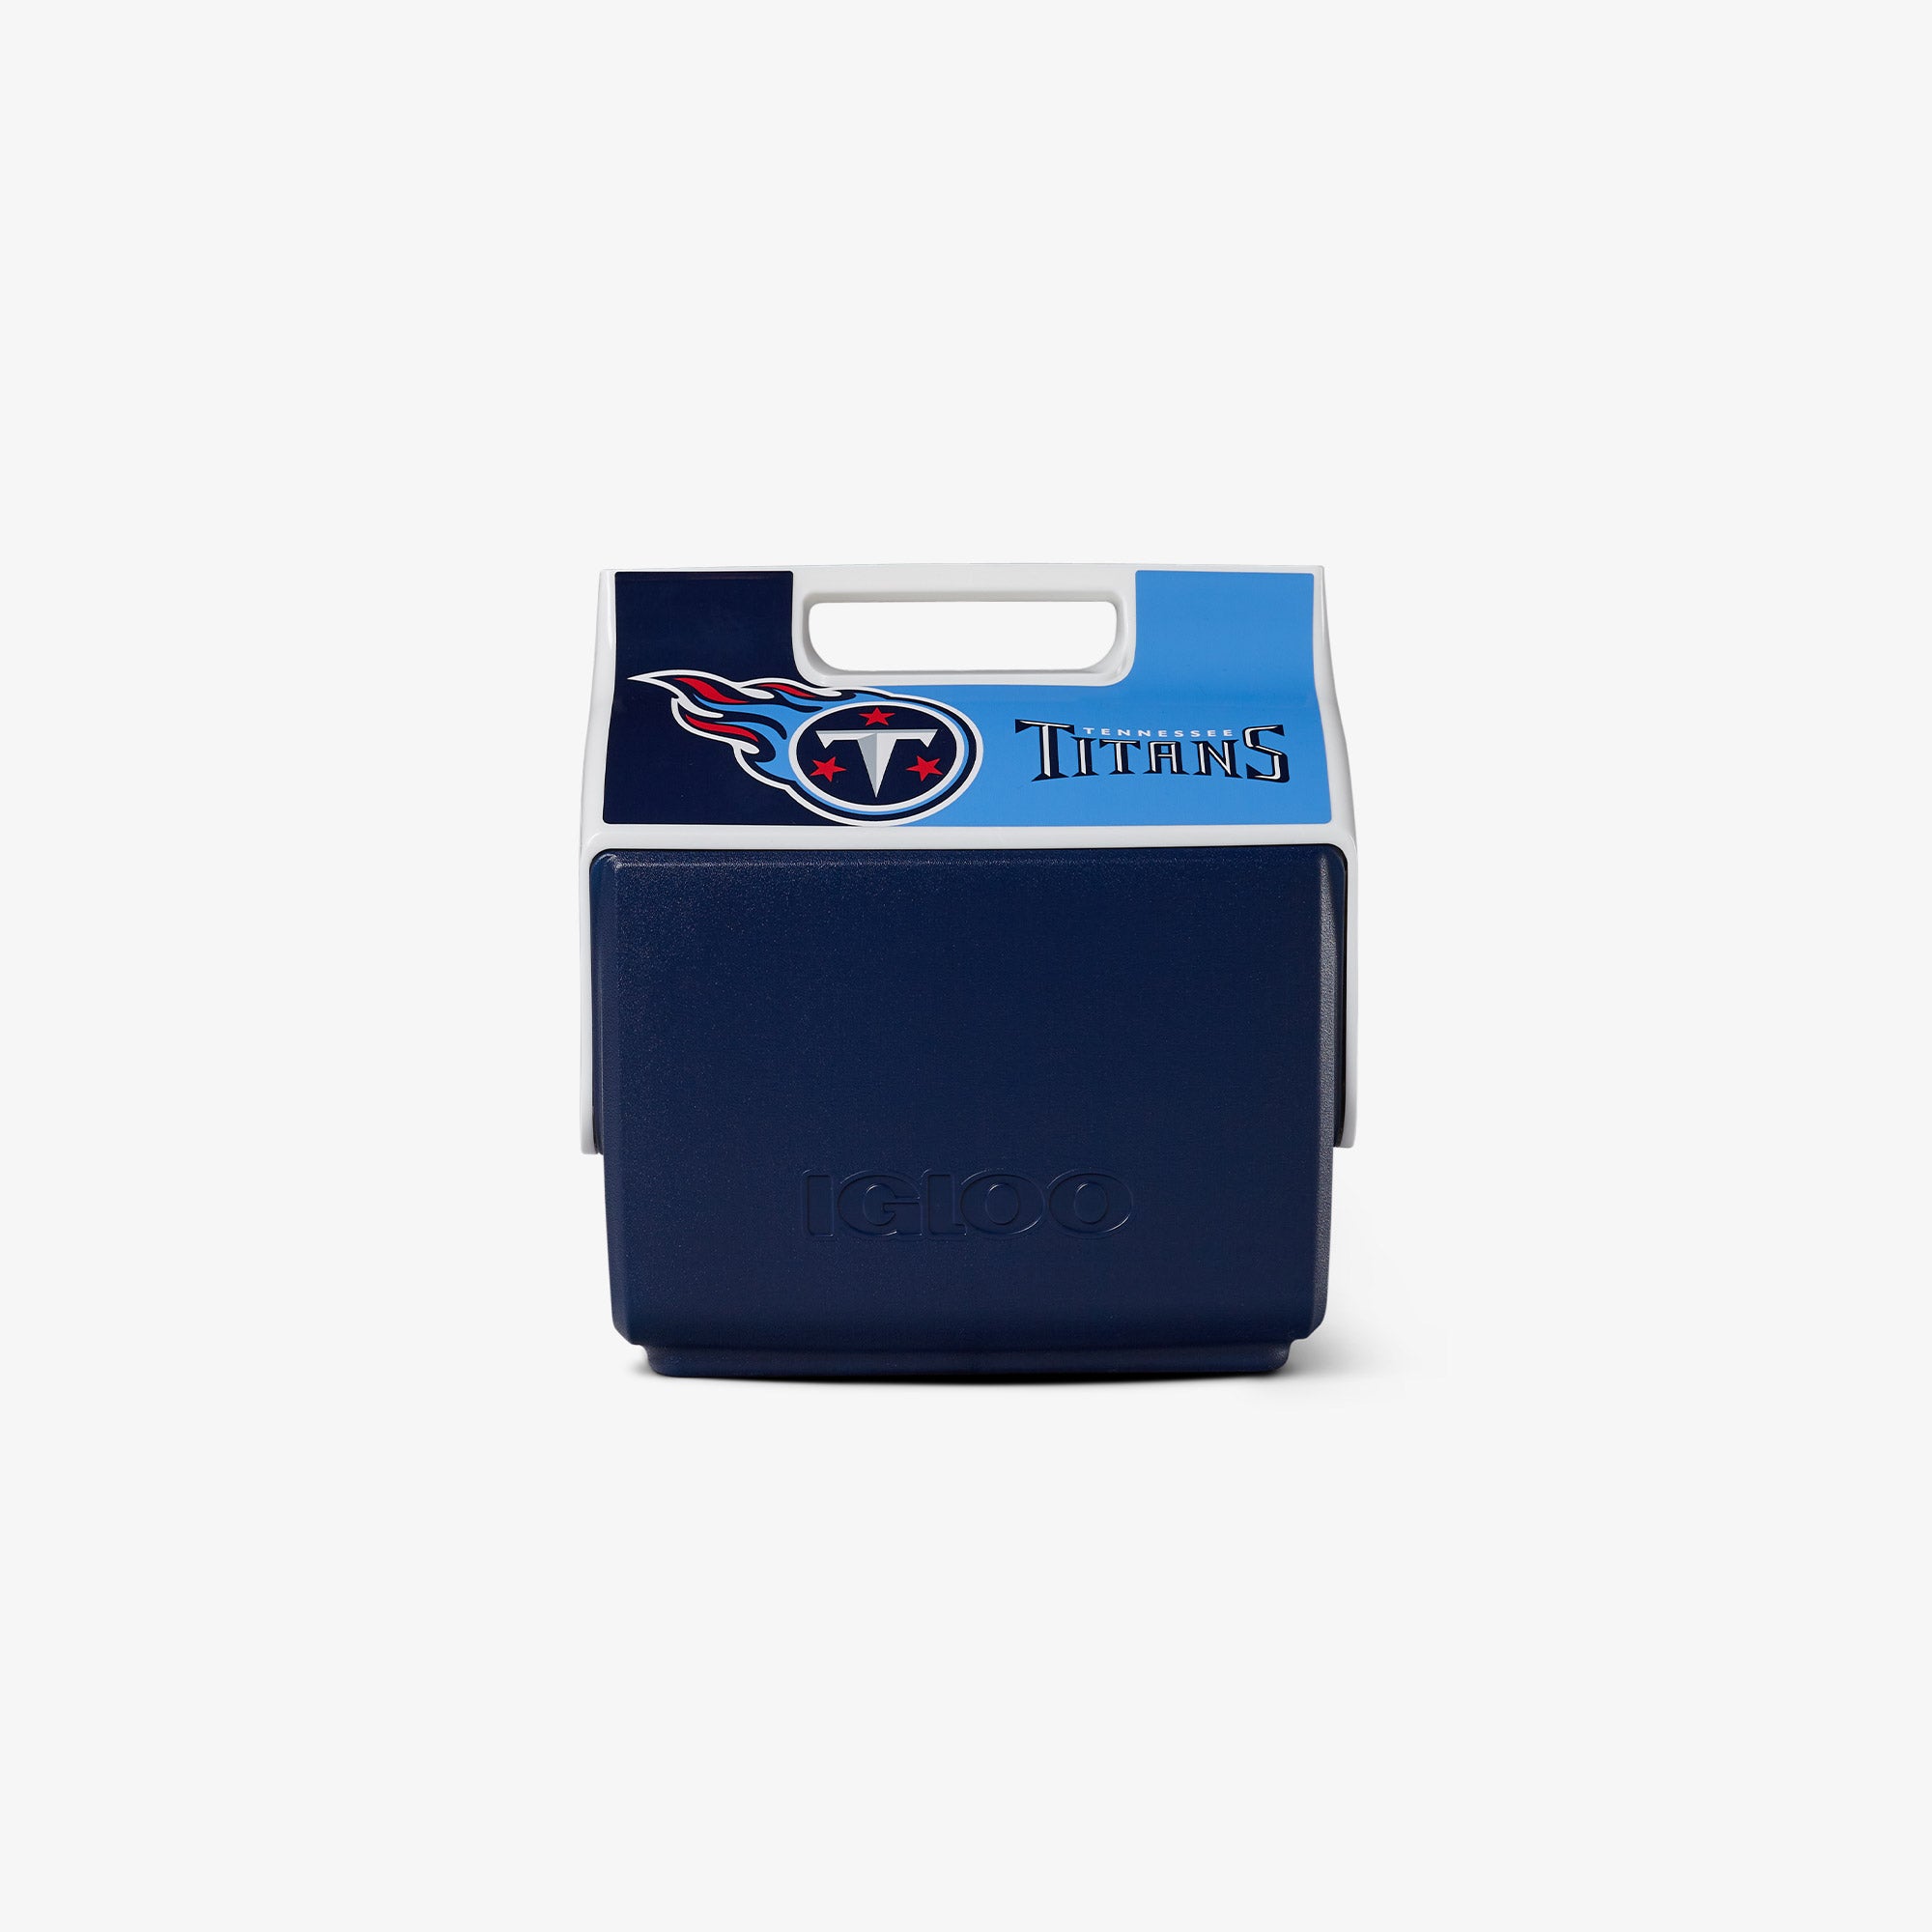 Vintage Tennessee Titans Football Tailgate Retro Party - Titans